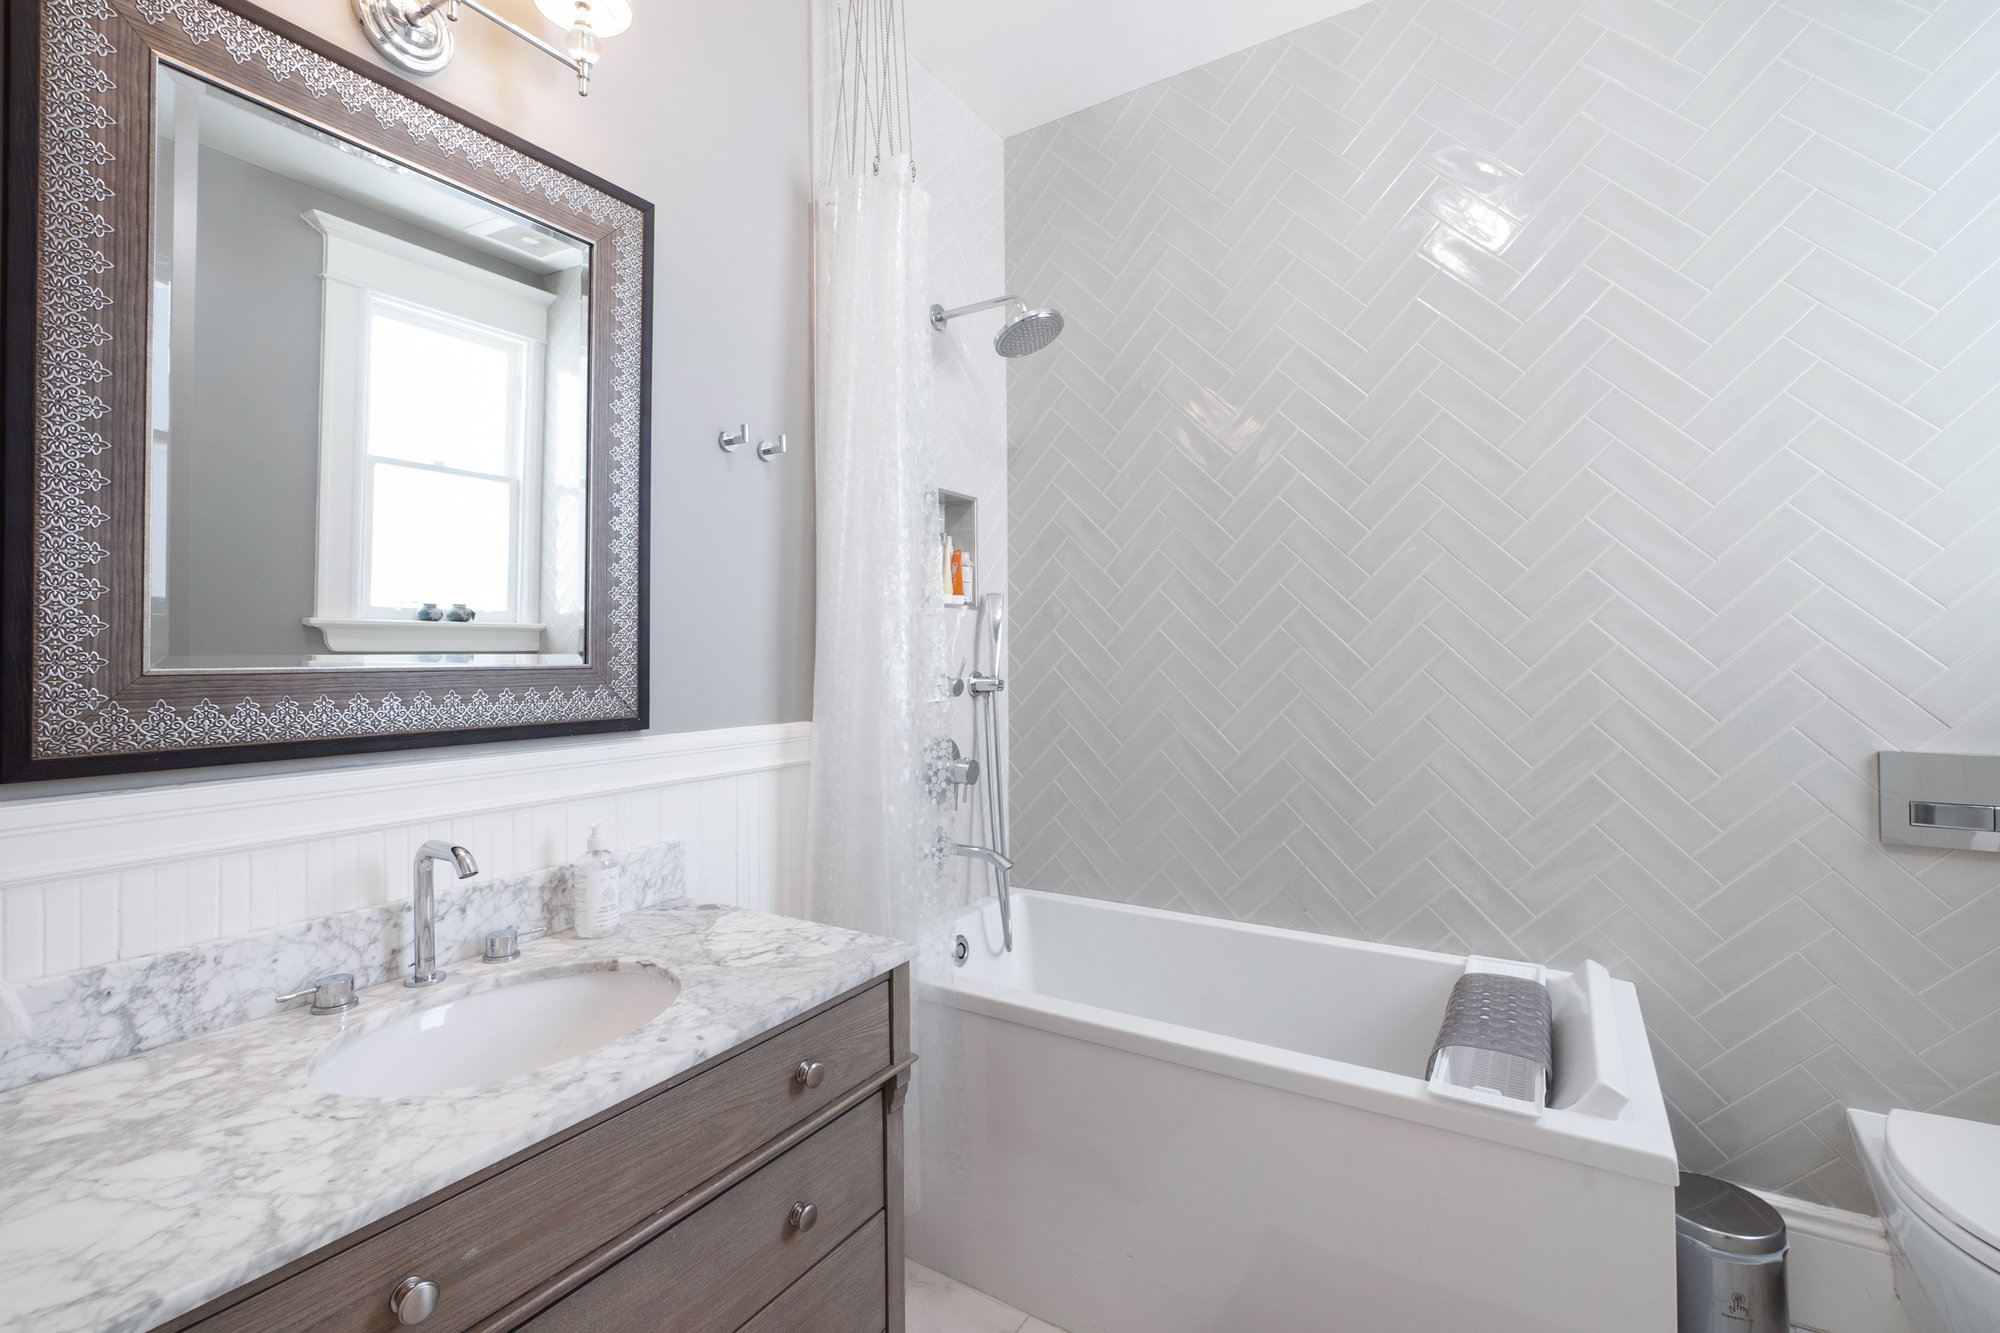 Property Photo: Bathroom with large soaking tub and lux wall tiling 